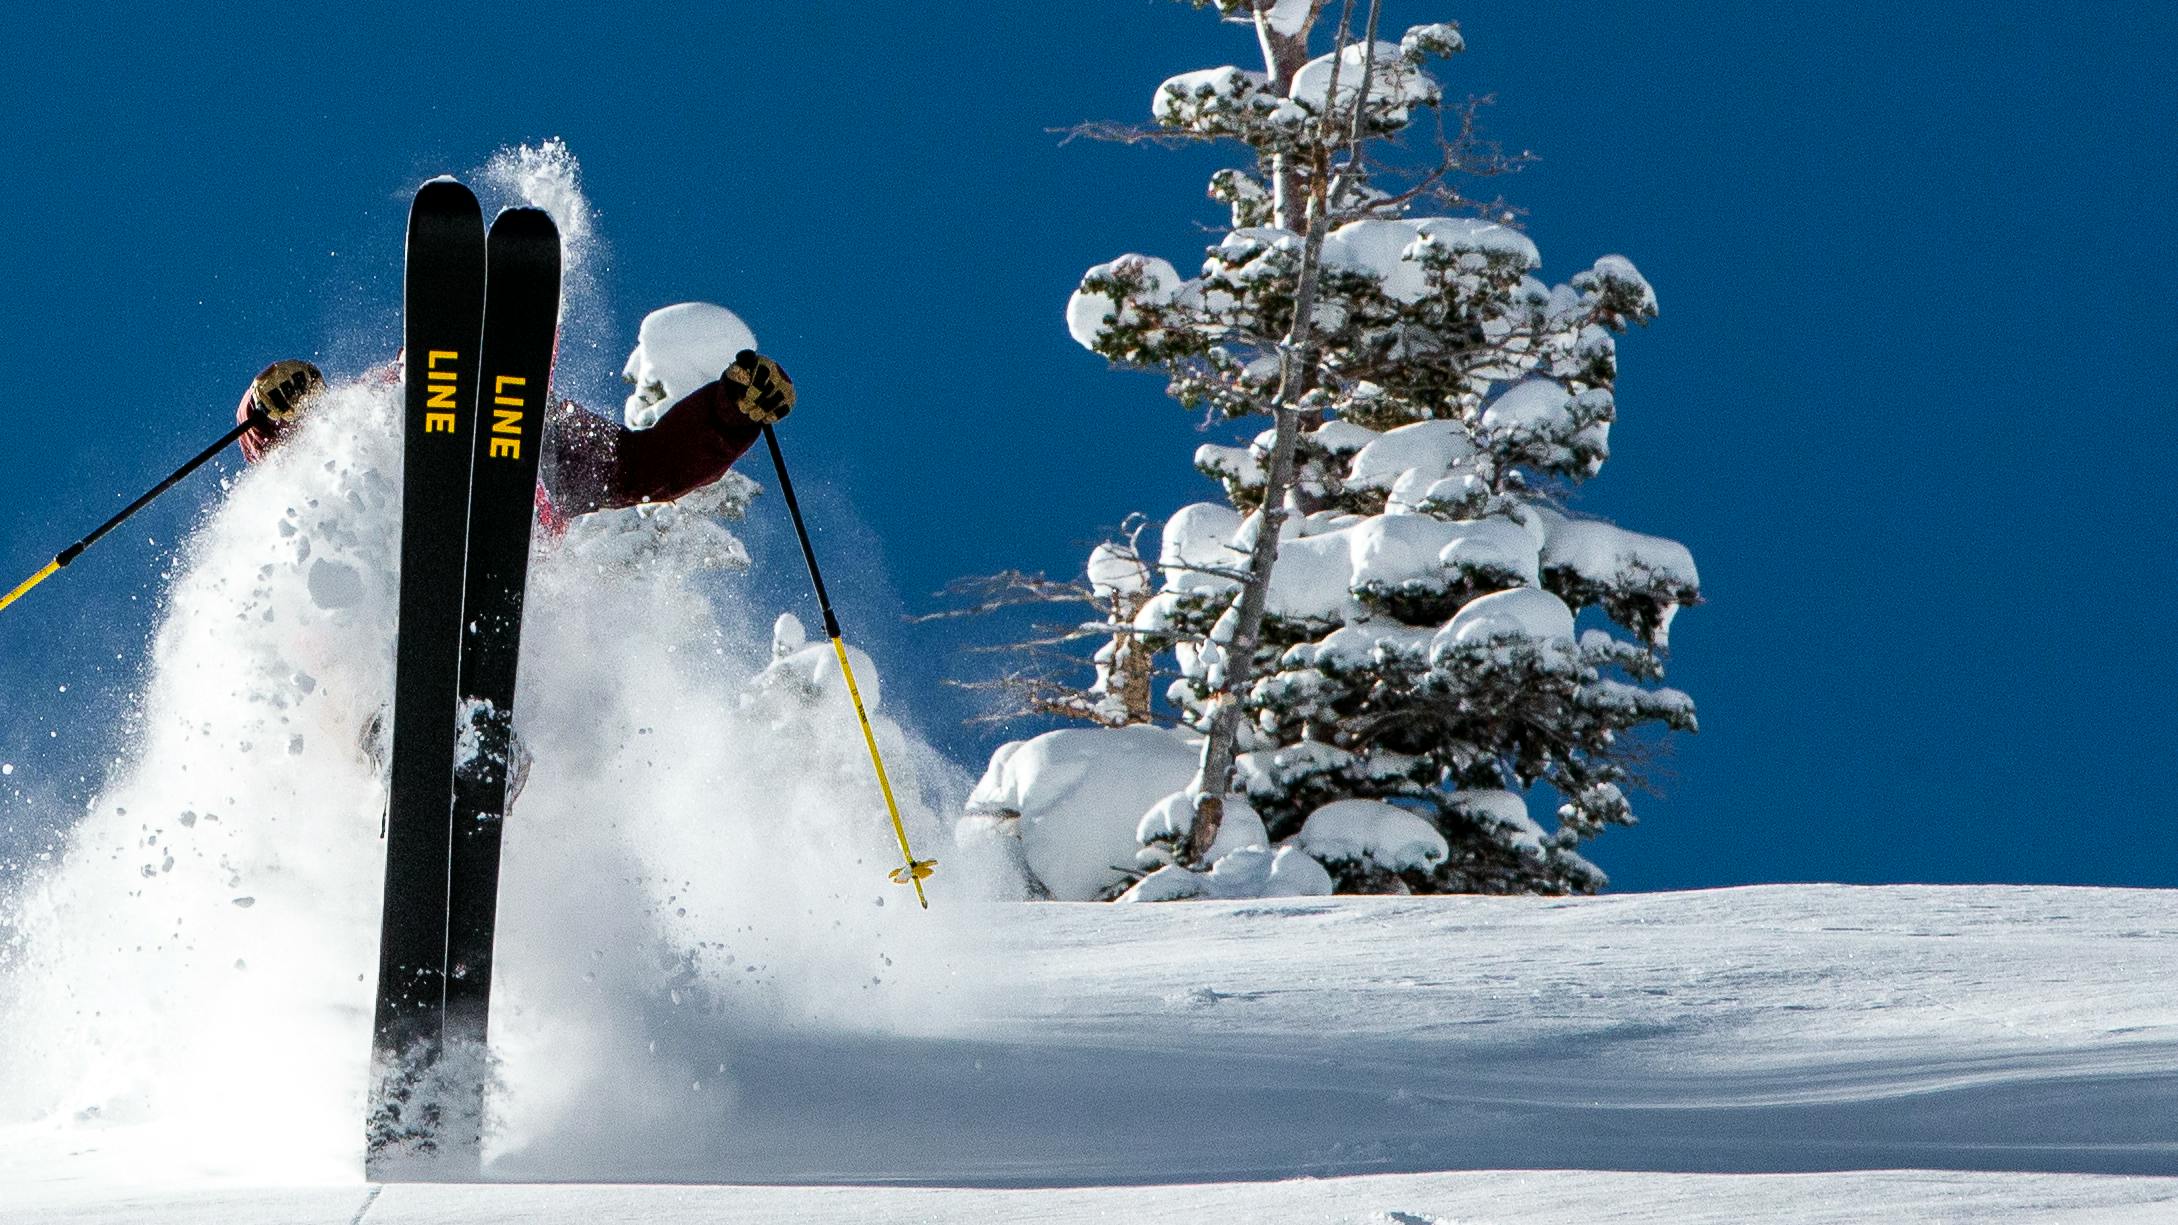 A skier doing a trick on Line skis. 